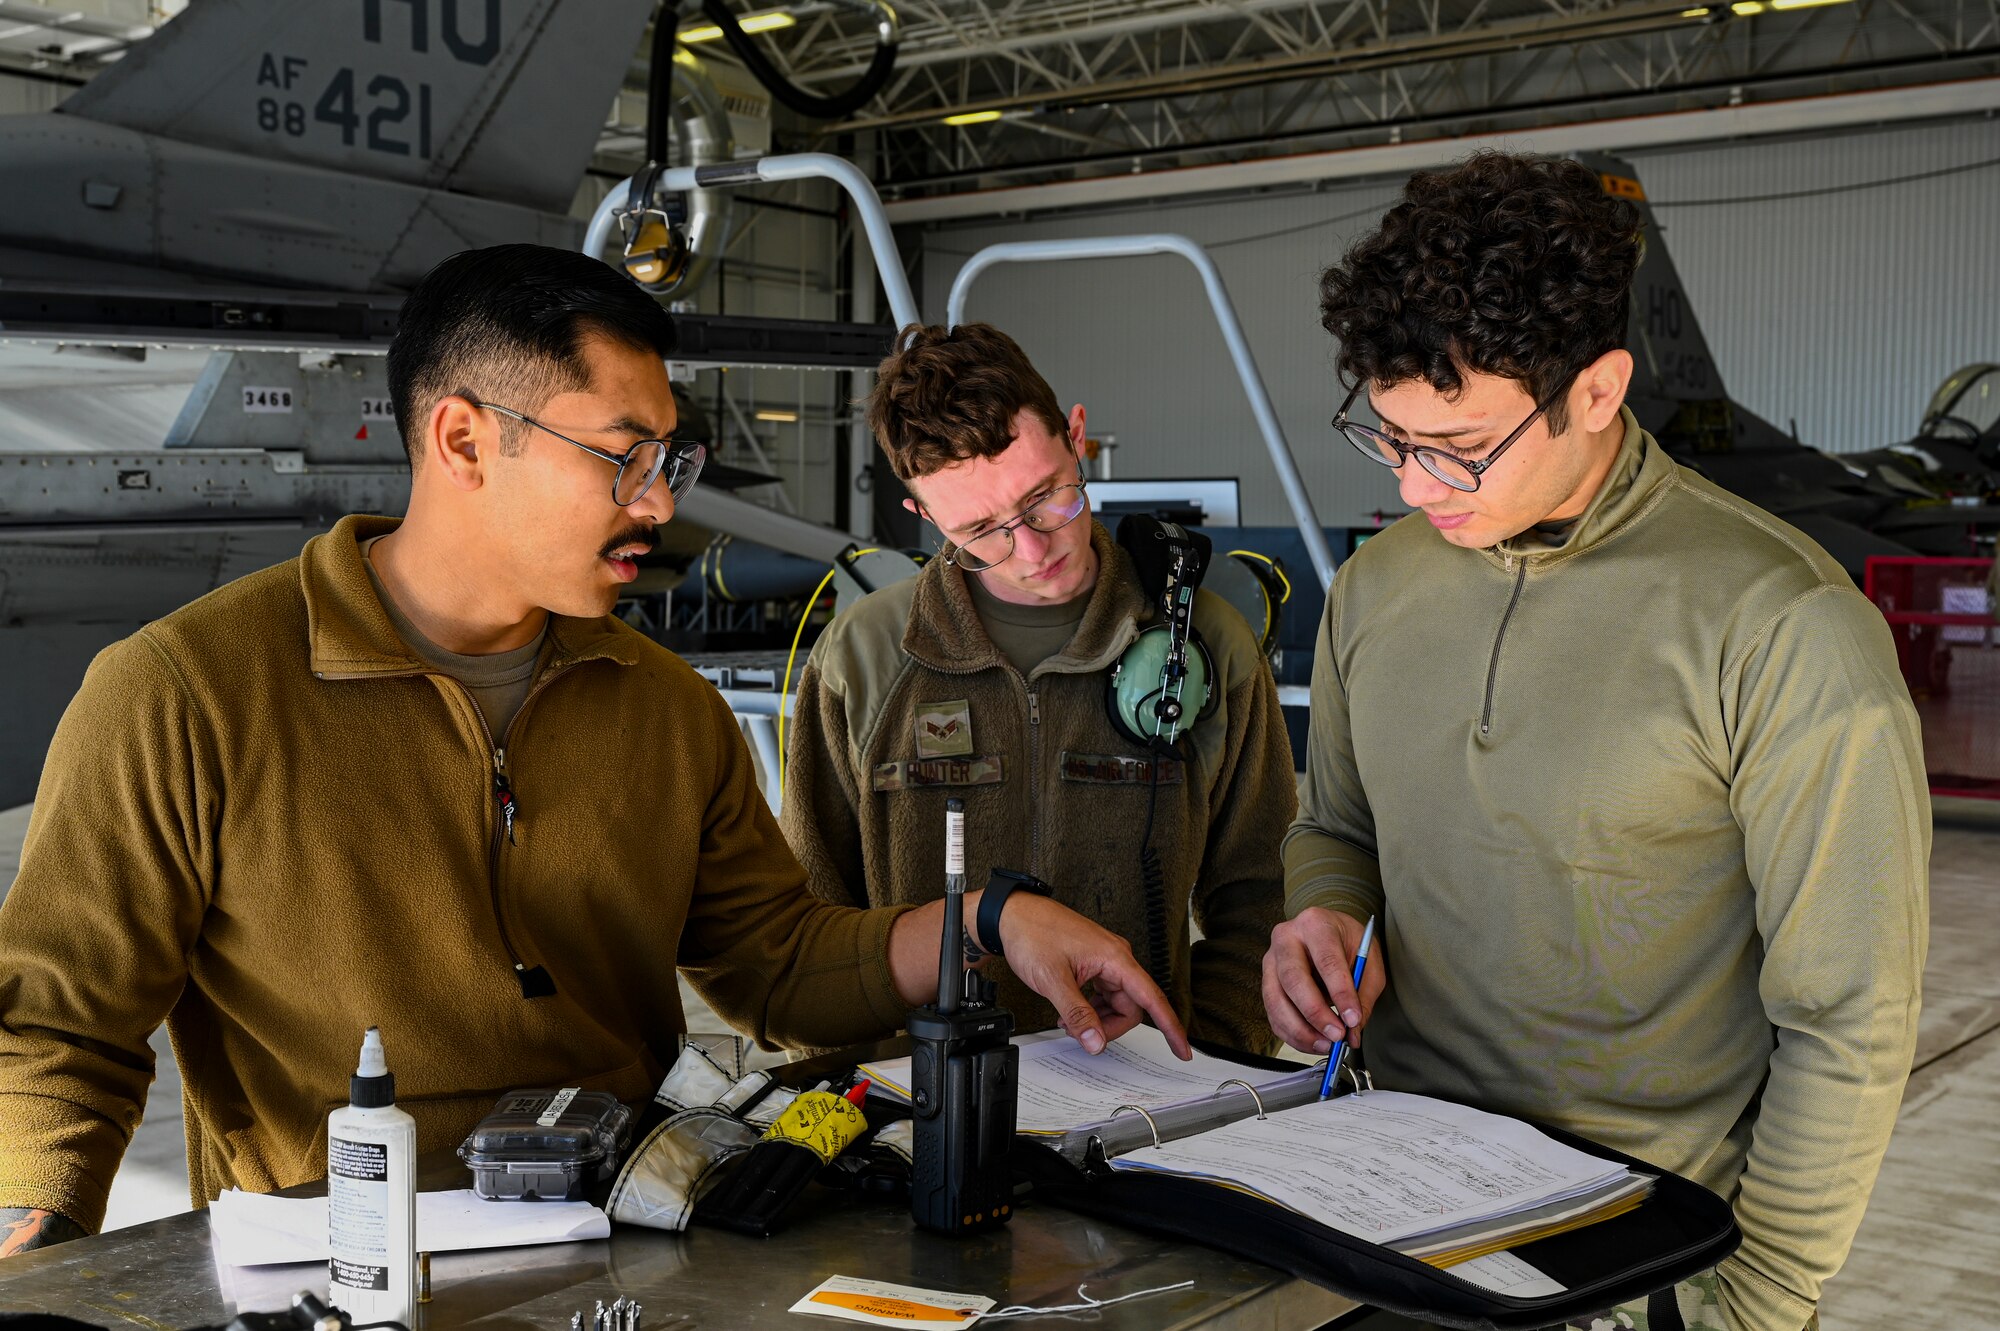 U.S. Air Force Staff Sgt. Brandon Millare, 49th Component Maintenance Squadron fuels craftsman, left, U.S. Air Force Senior Airman William Hunter, 49th CMS fuels journeyman, center, and U.S. Air Force Staff Sgt. Luis Ayala, 49th CMS fuels craftsman, look through maintenance documents at Holloman Air Force Base, New Mexico, Feb. 8, 2023. The 49th CMS provides maintenance to all F-16 Vipers on base and ensures that each aircraft is operational for combat effectiveness.  (U.S. Air Force photo by Airman 1st Class Isaiah Pedrazzini